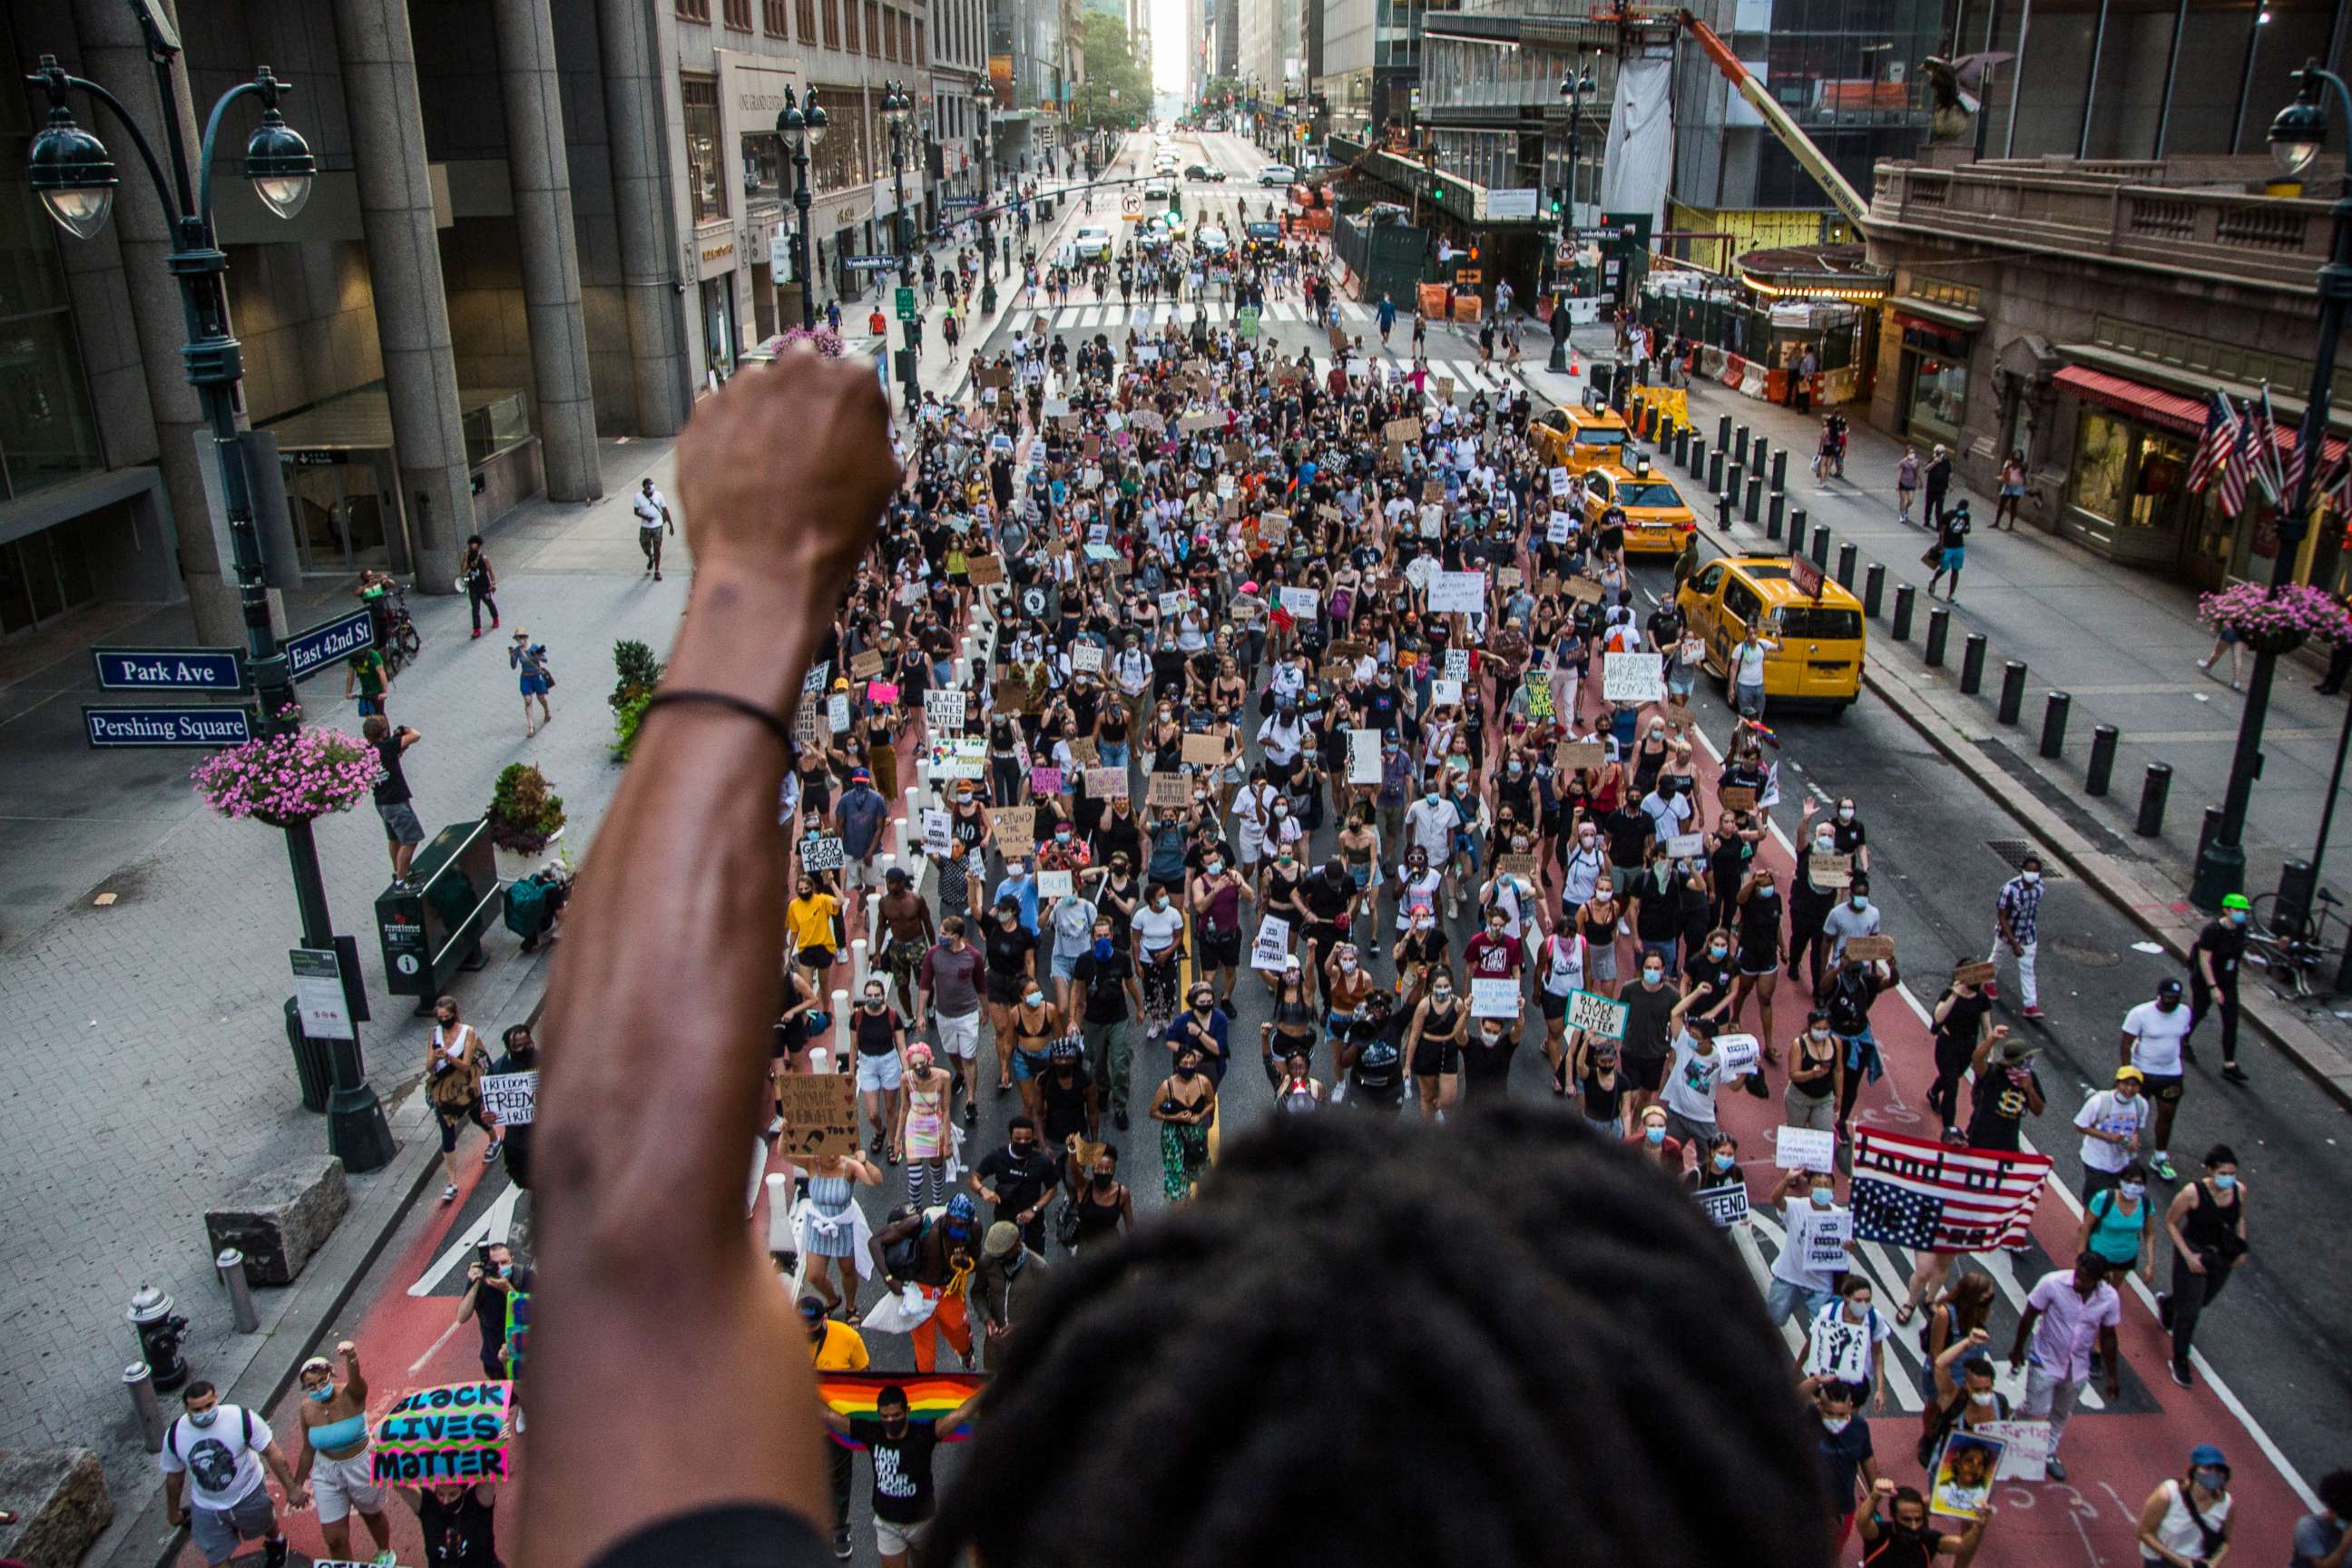 PHOTO: A man raises his arm in support of the crowd of protesters marching in downtown New York, on July 26, 2020.